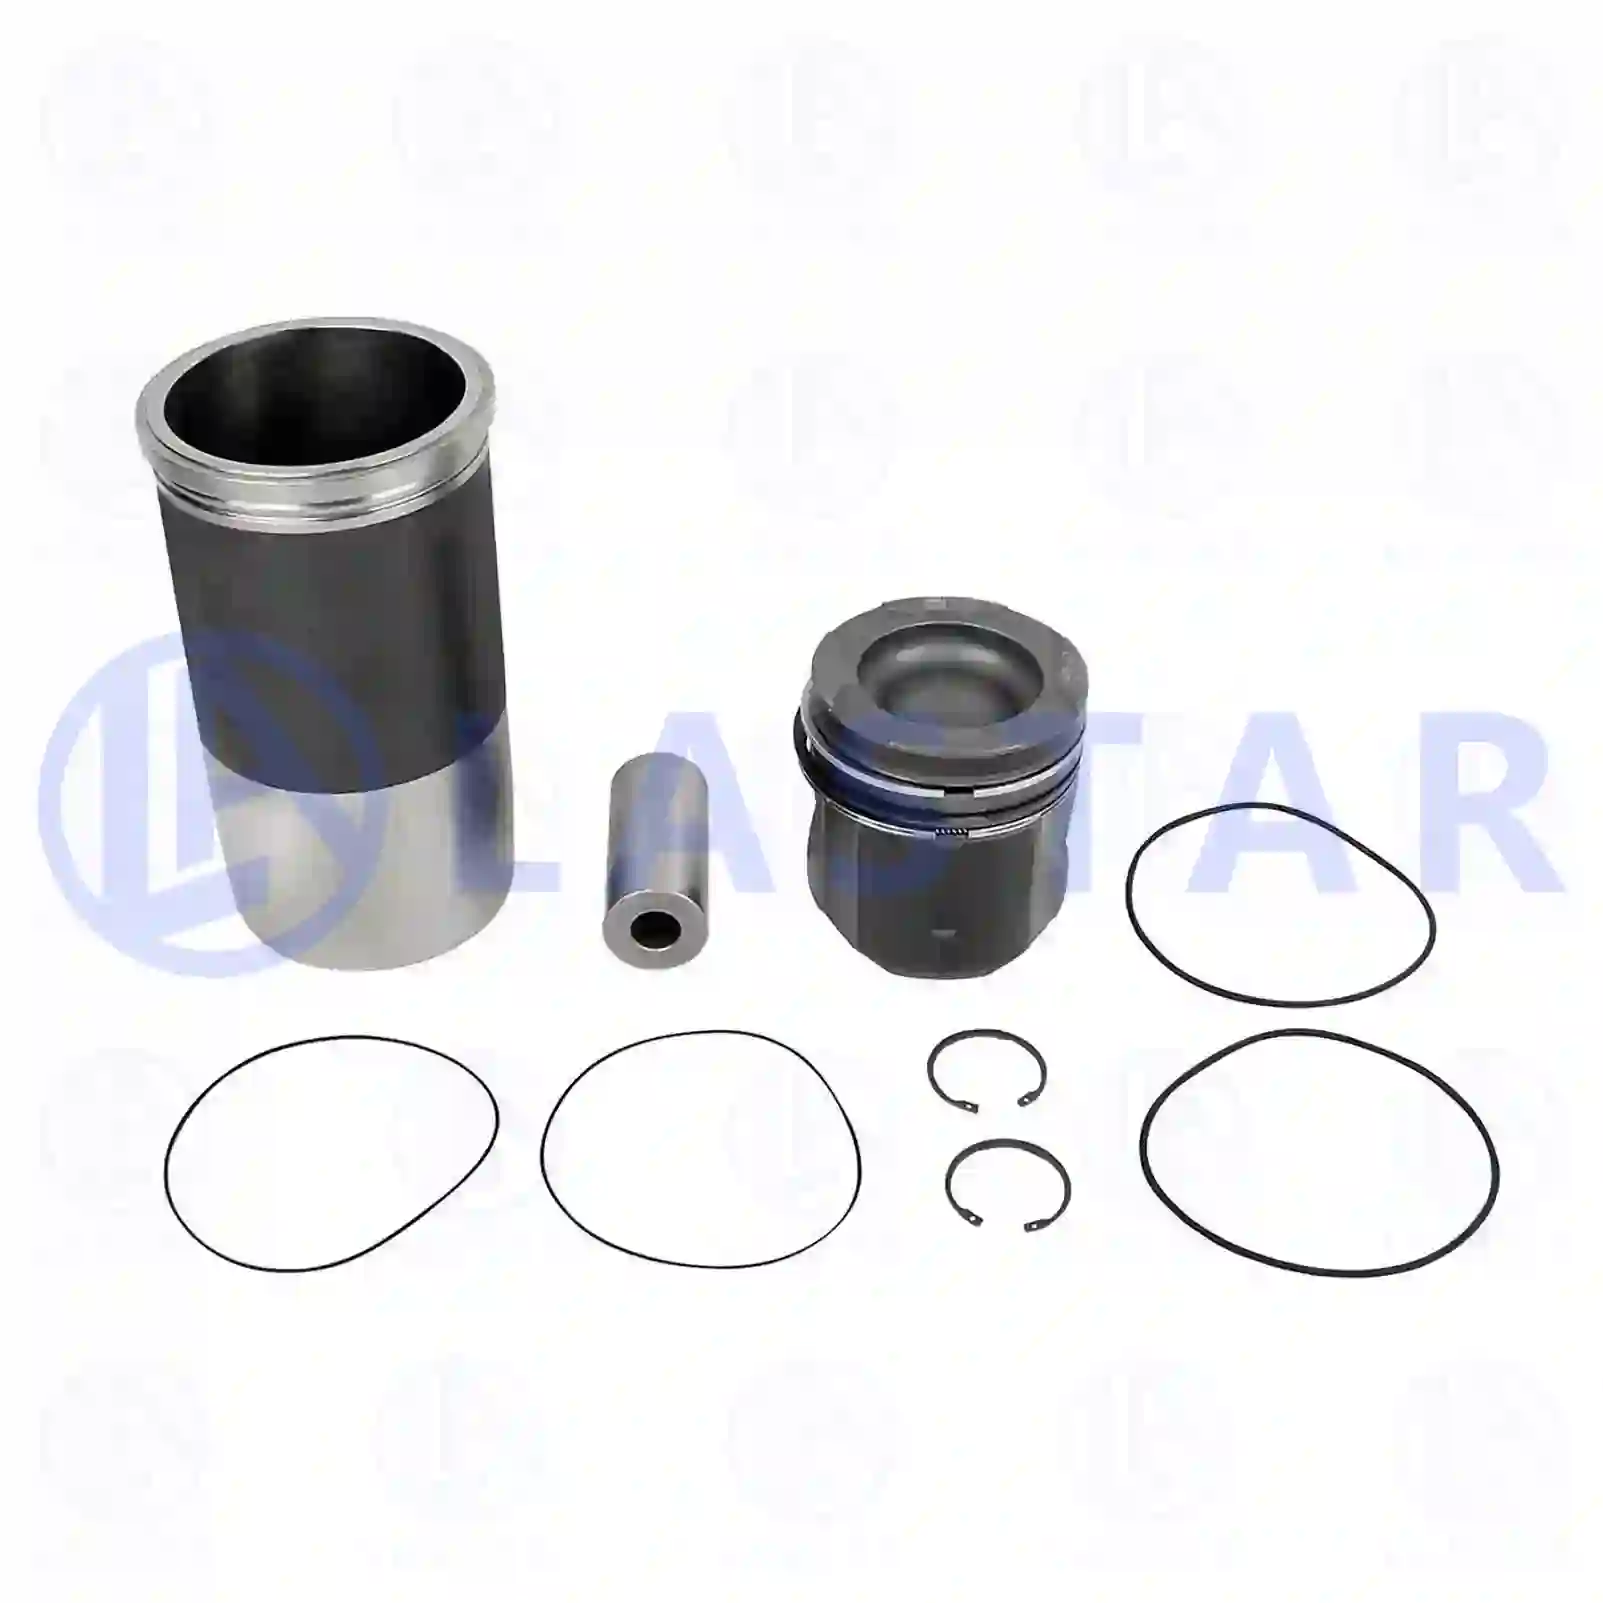 Piston with liner, 77700999, 51025006019S ||  77700999 Lastar Spare Part | Truck Spare Parts, Auotomotive Spare Parts Piston with liner, 77700999, 51025006019S ||  77700999 Lastar Spare Part | Truck Spare Parts, Auotomotive Spare Parts